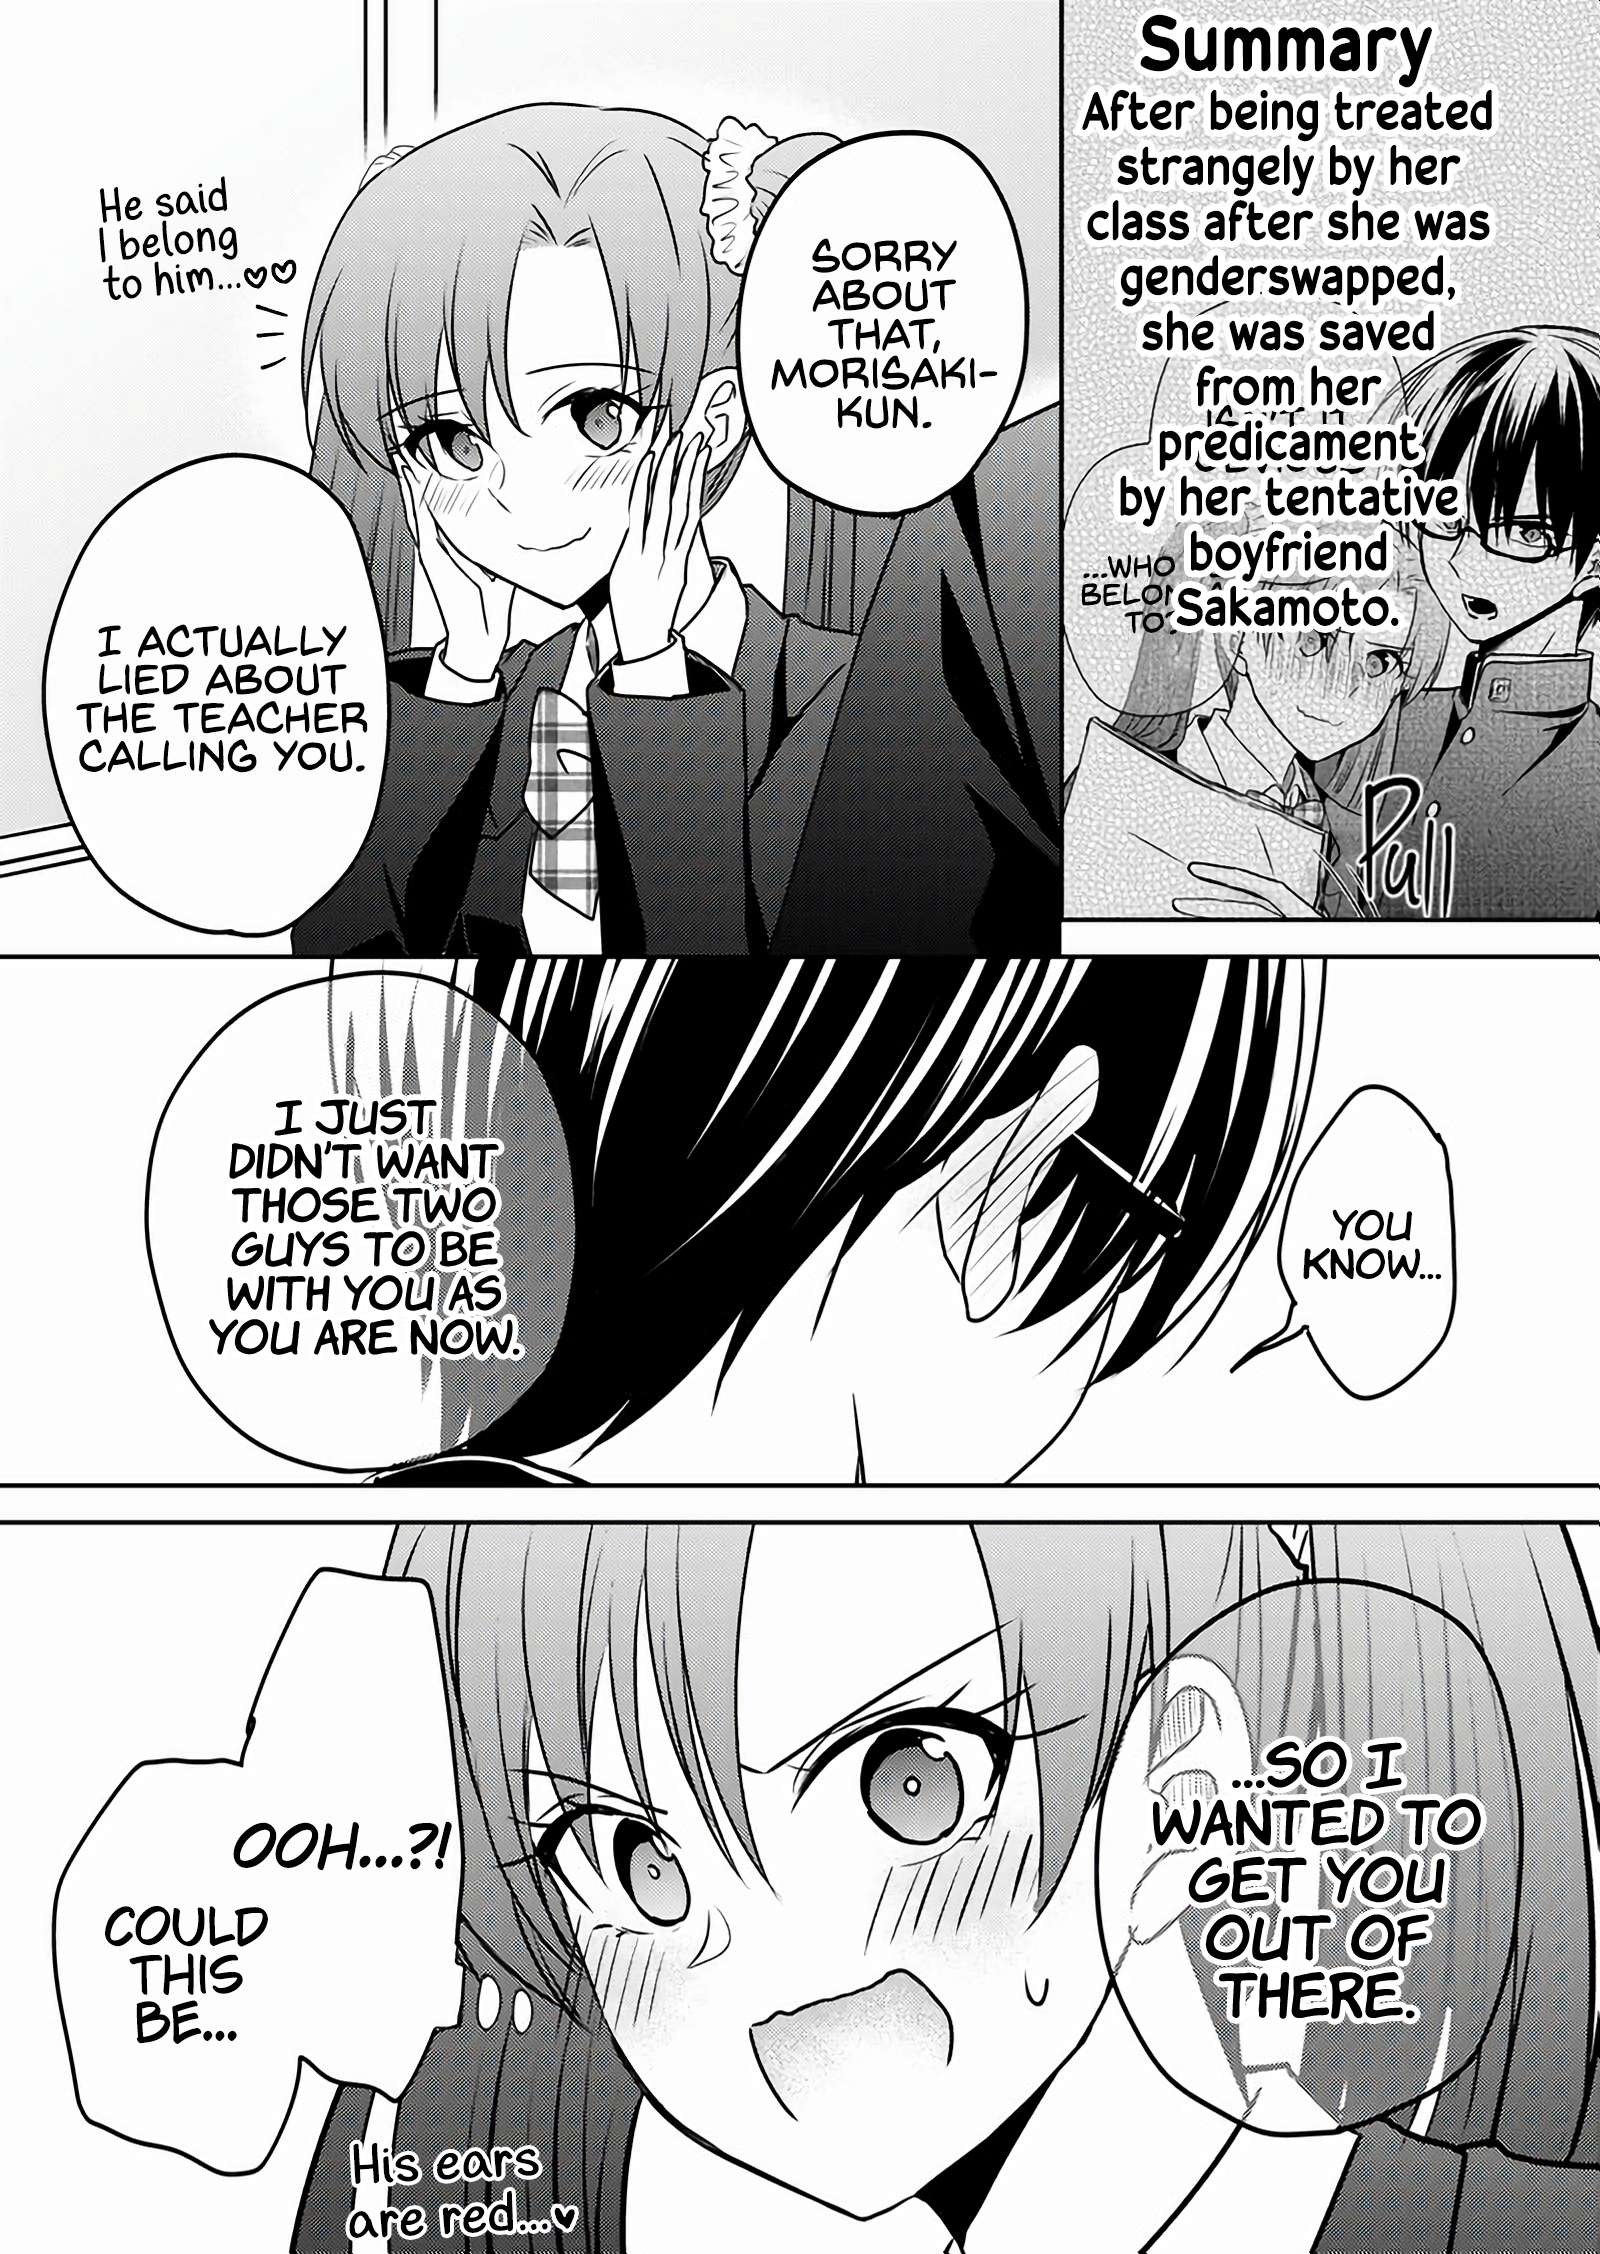 I Got Genderswapped (♂→♀), So I Tried To Seduce My Classmate - chapter 2.2 - #1